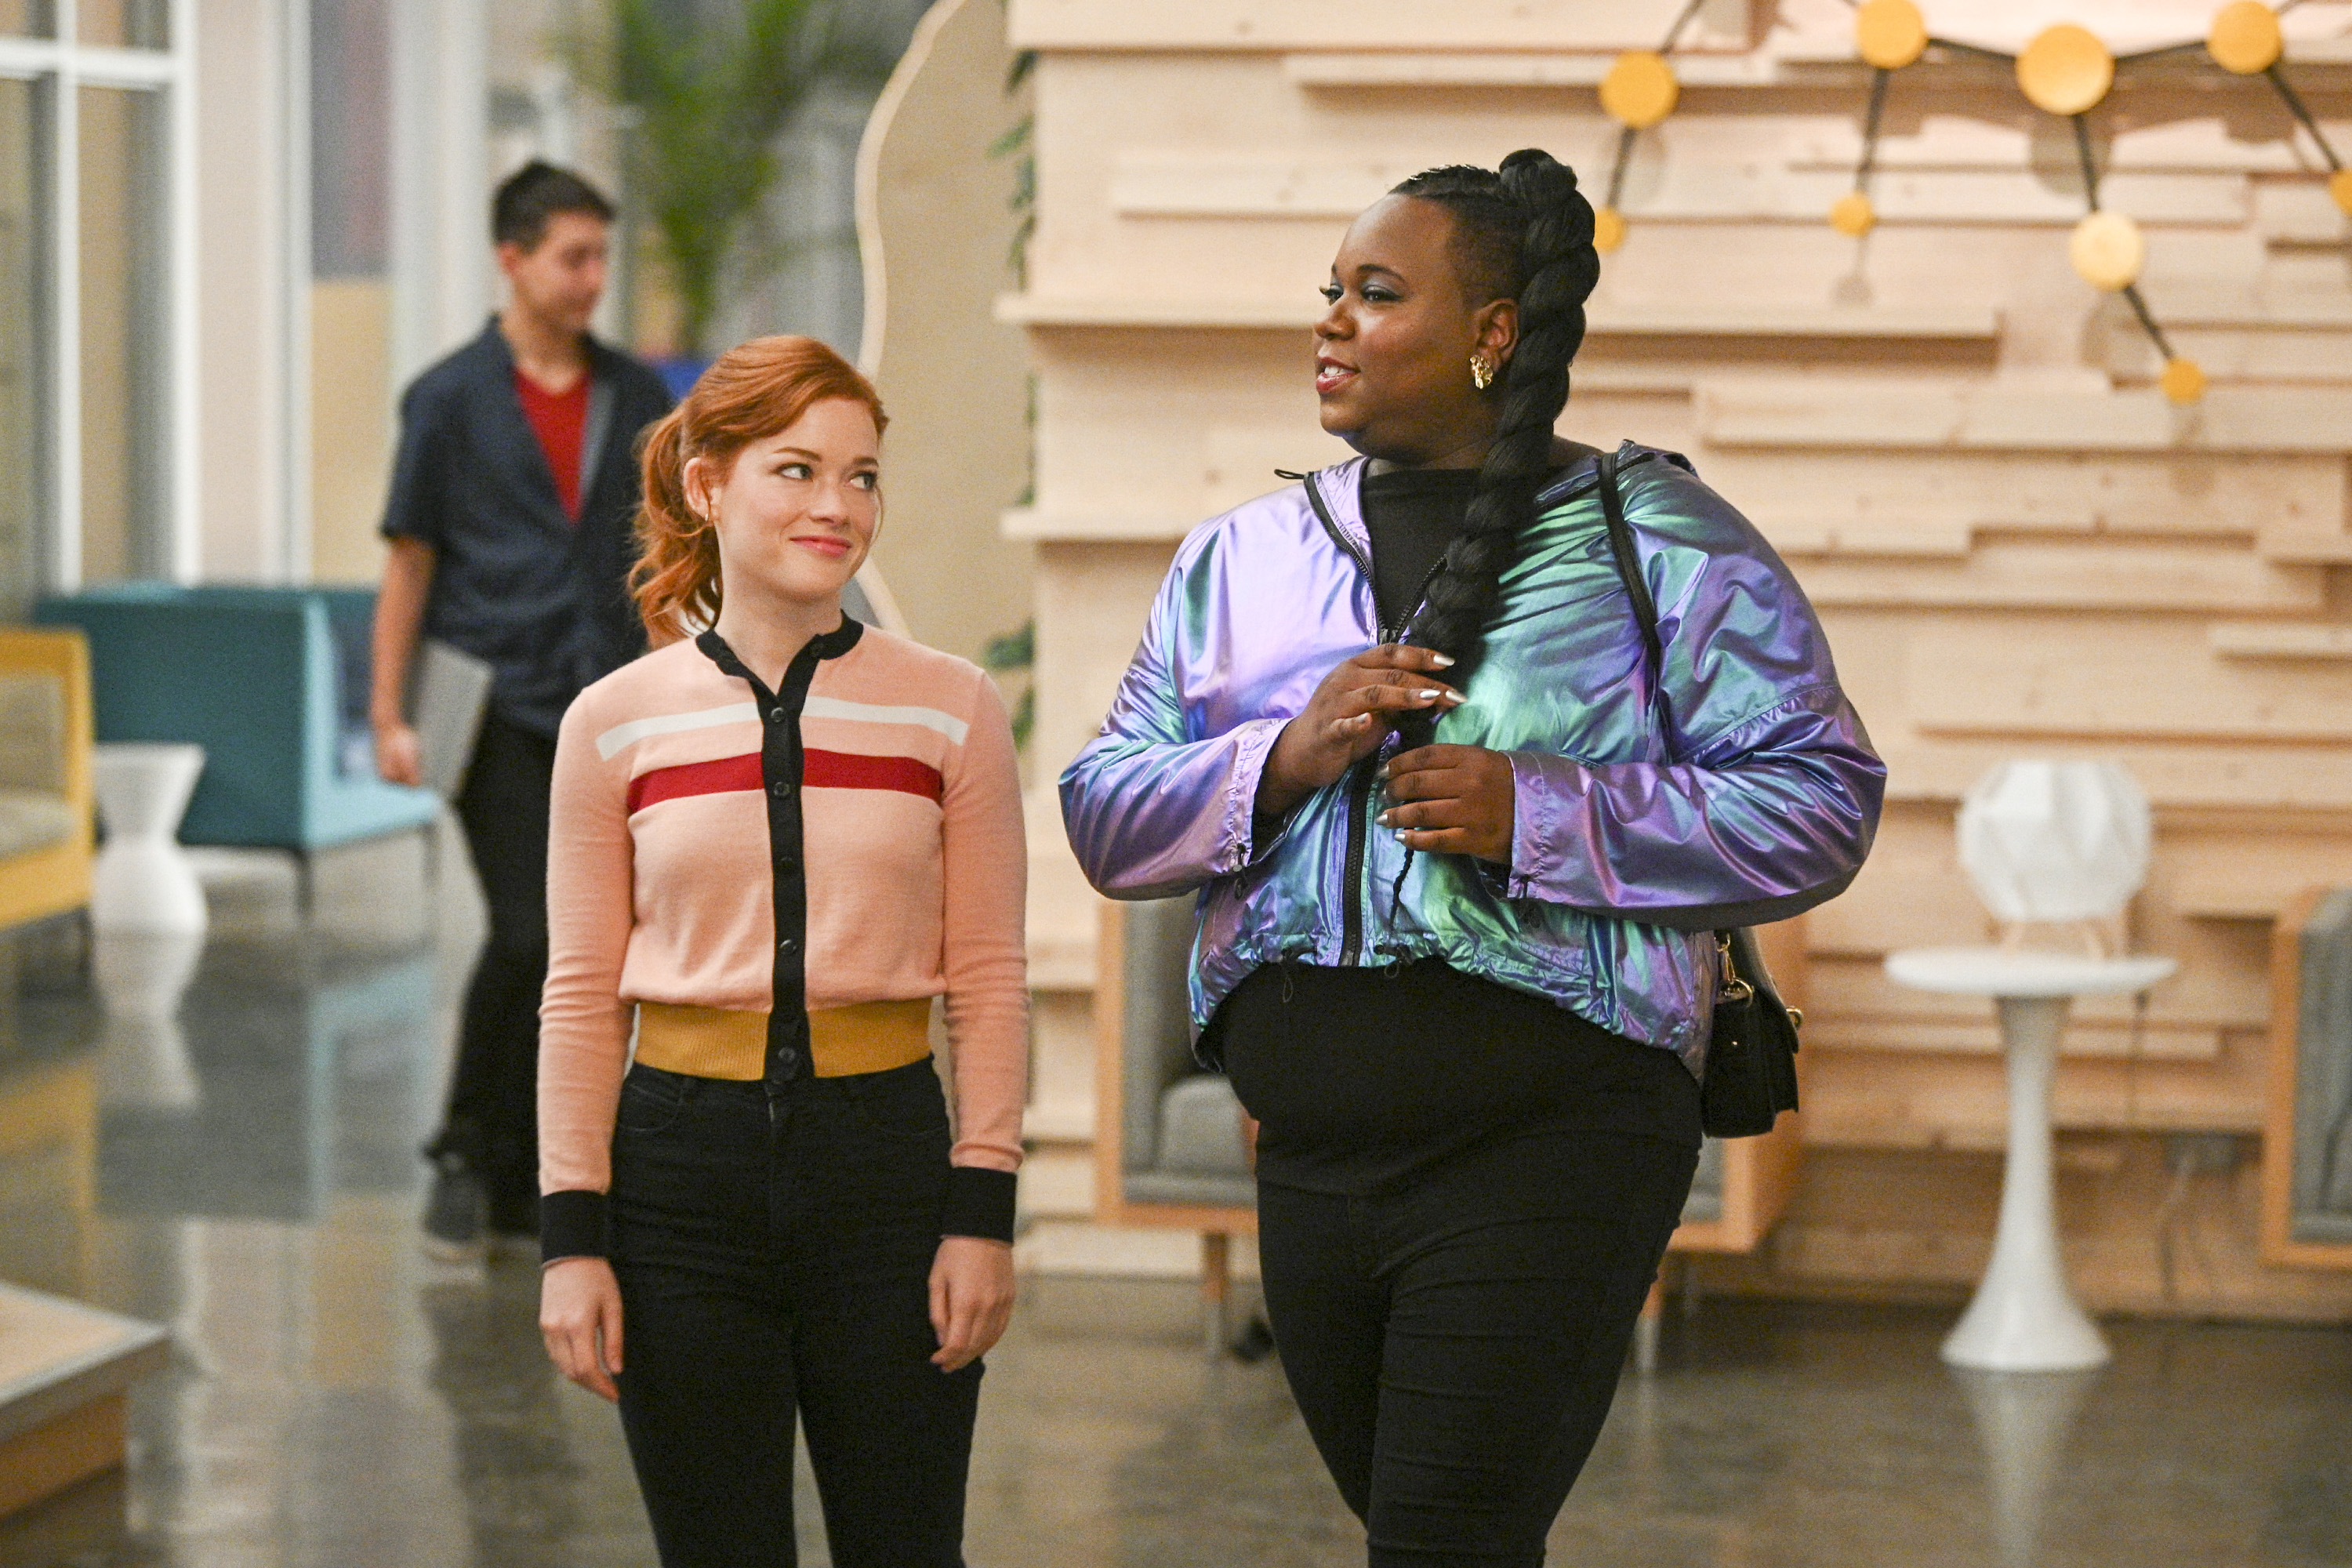 Two characters from a TV show walking and talking in an indoor set with a casual background